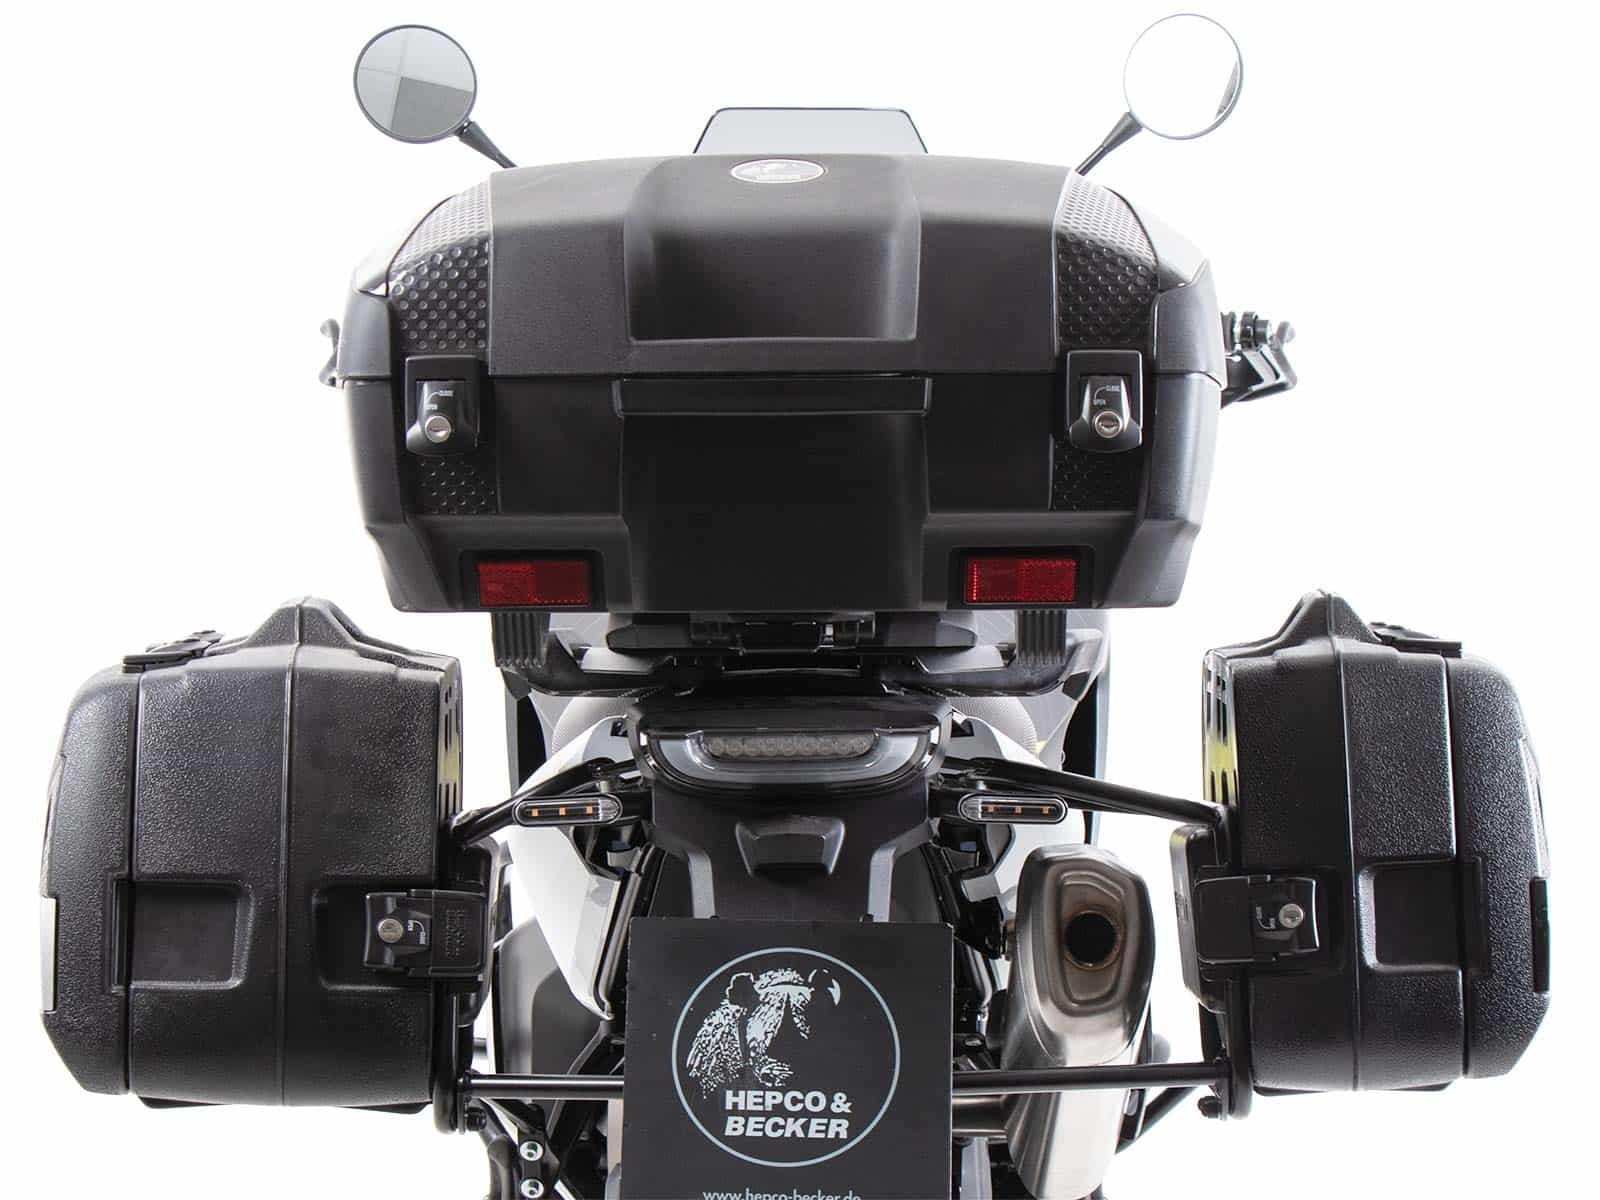 Alurack top case carrier black for combination with original rear rack for Husqvarna Norden 901 / Expedition (2022-)